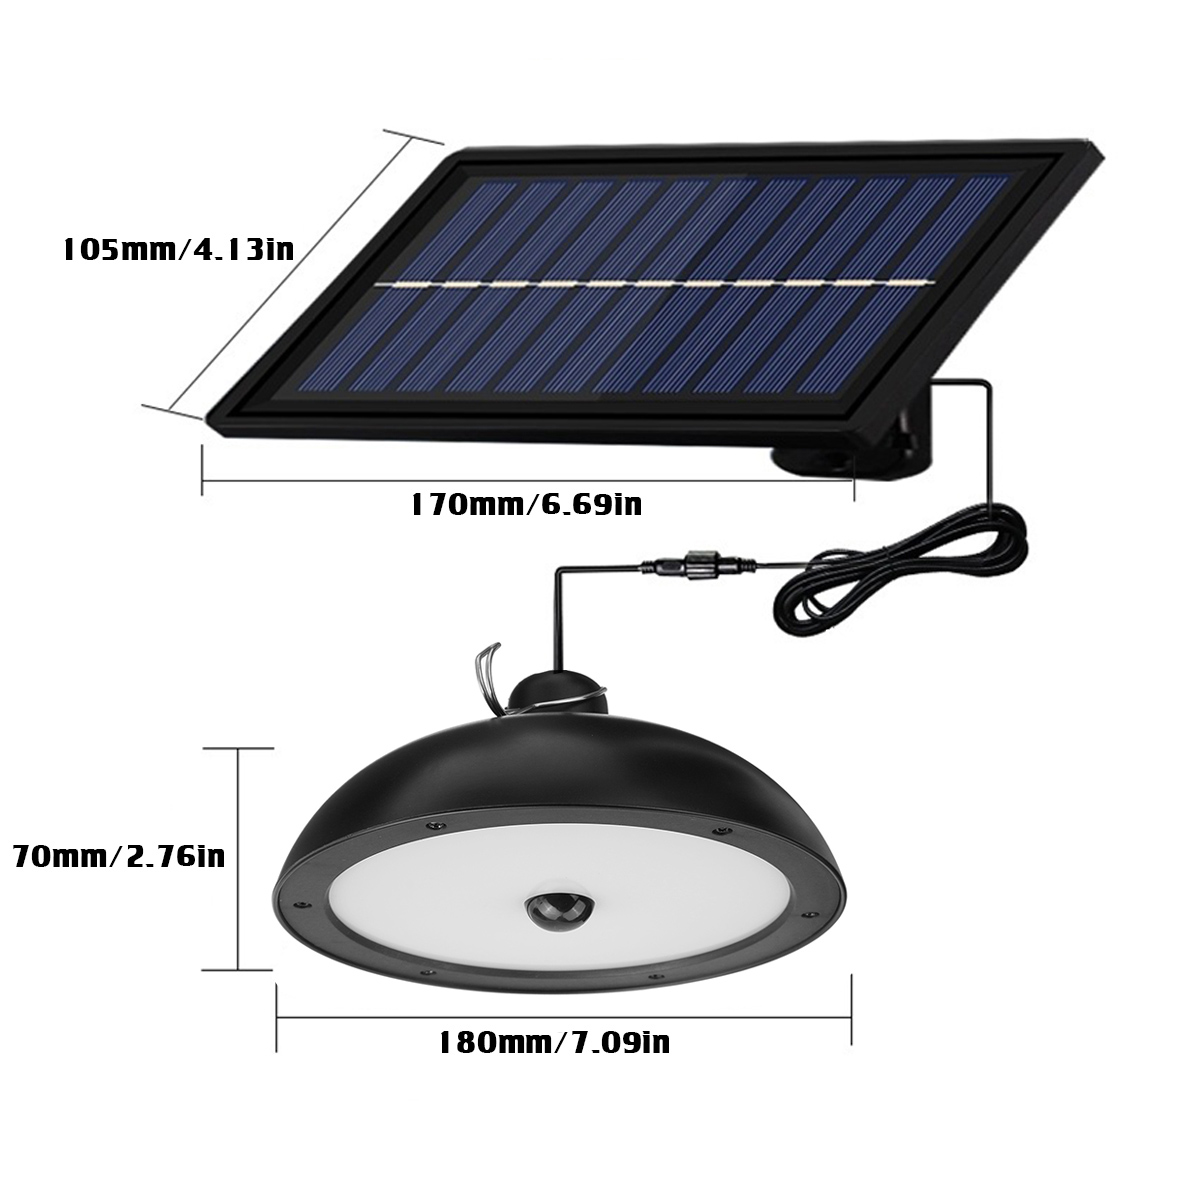 50W-900LM-Solar-Wall-Lamp-with-Remote-Control-Polycrystalline-Induction-Pendant-Light-Waterproof-Sup-1891988-7